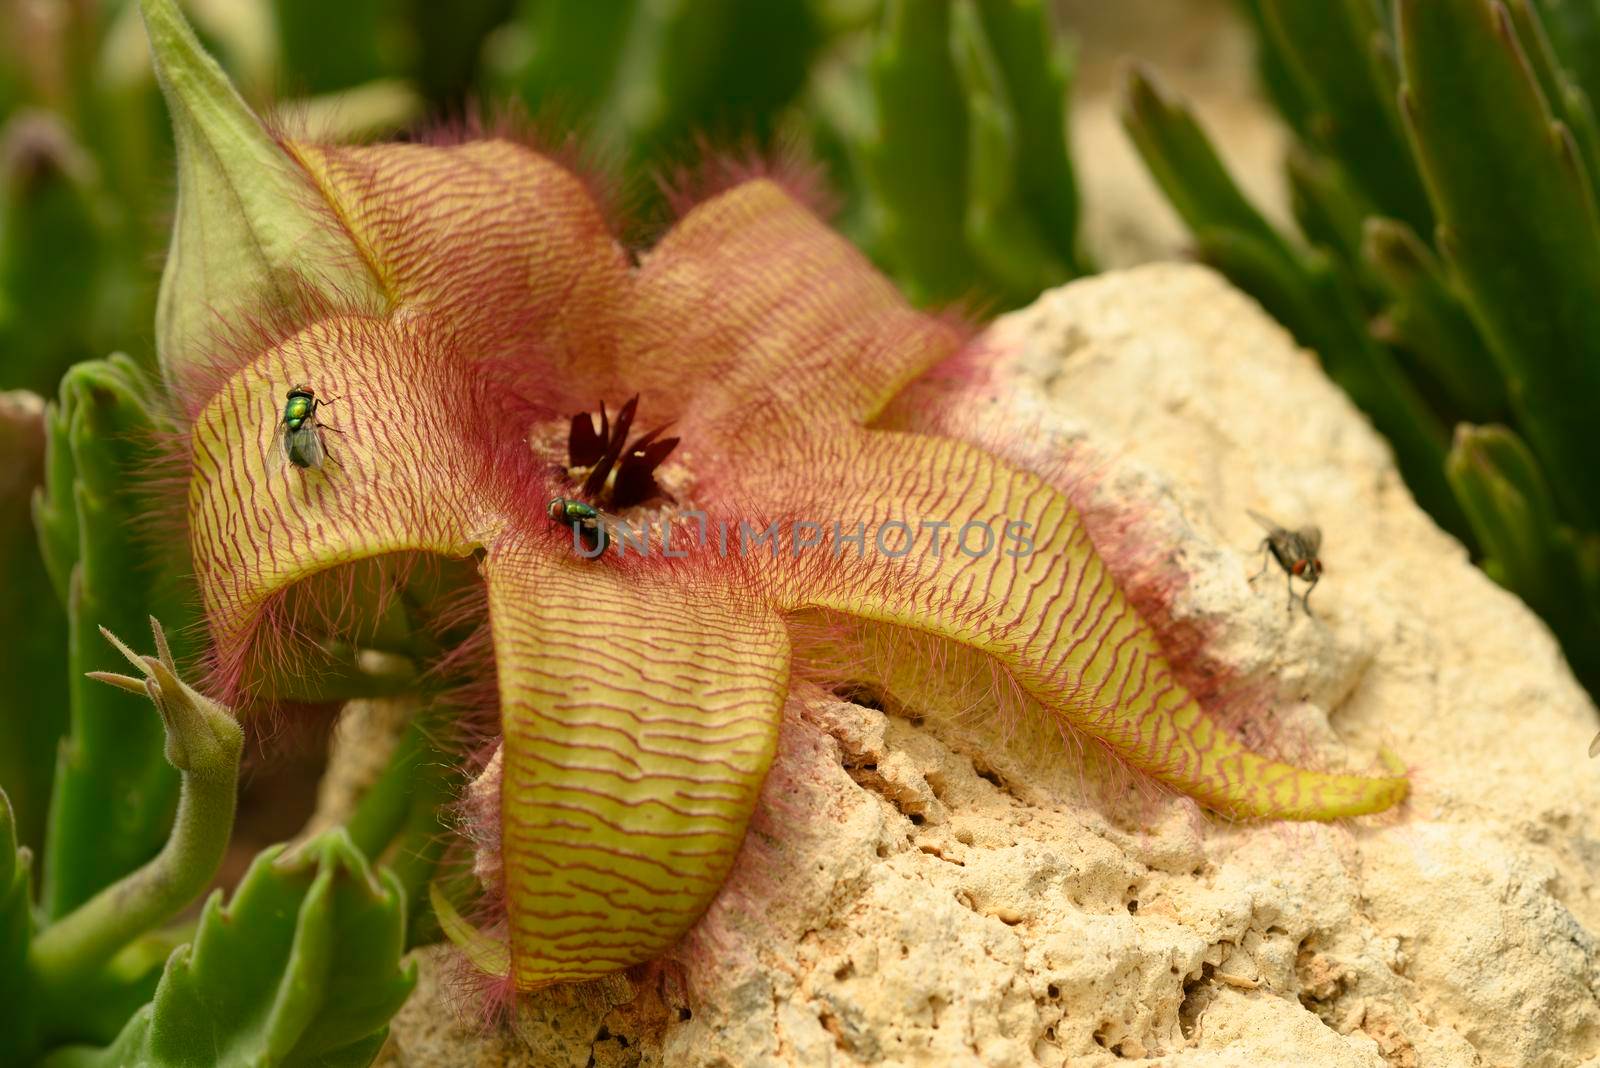 Flower detail of Stapelia gigantea,  carrion plant with green flies laying eggs at its center. by AlessandroZocc